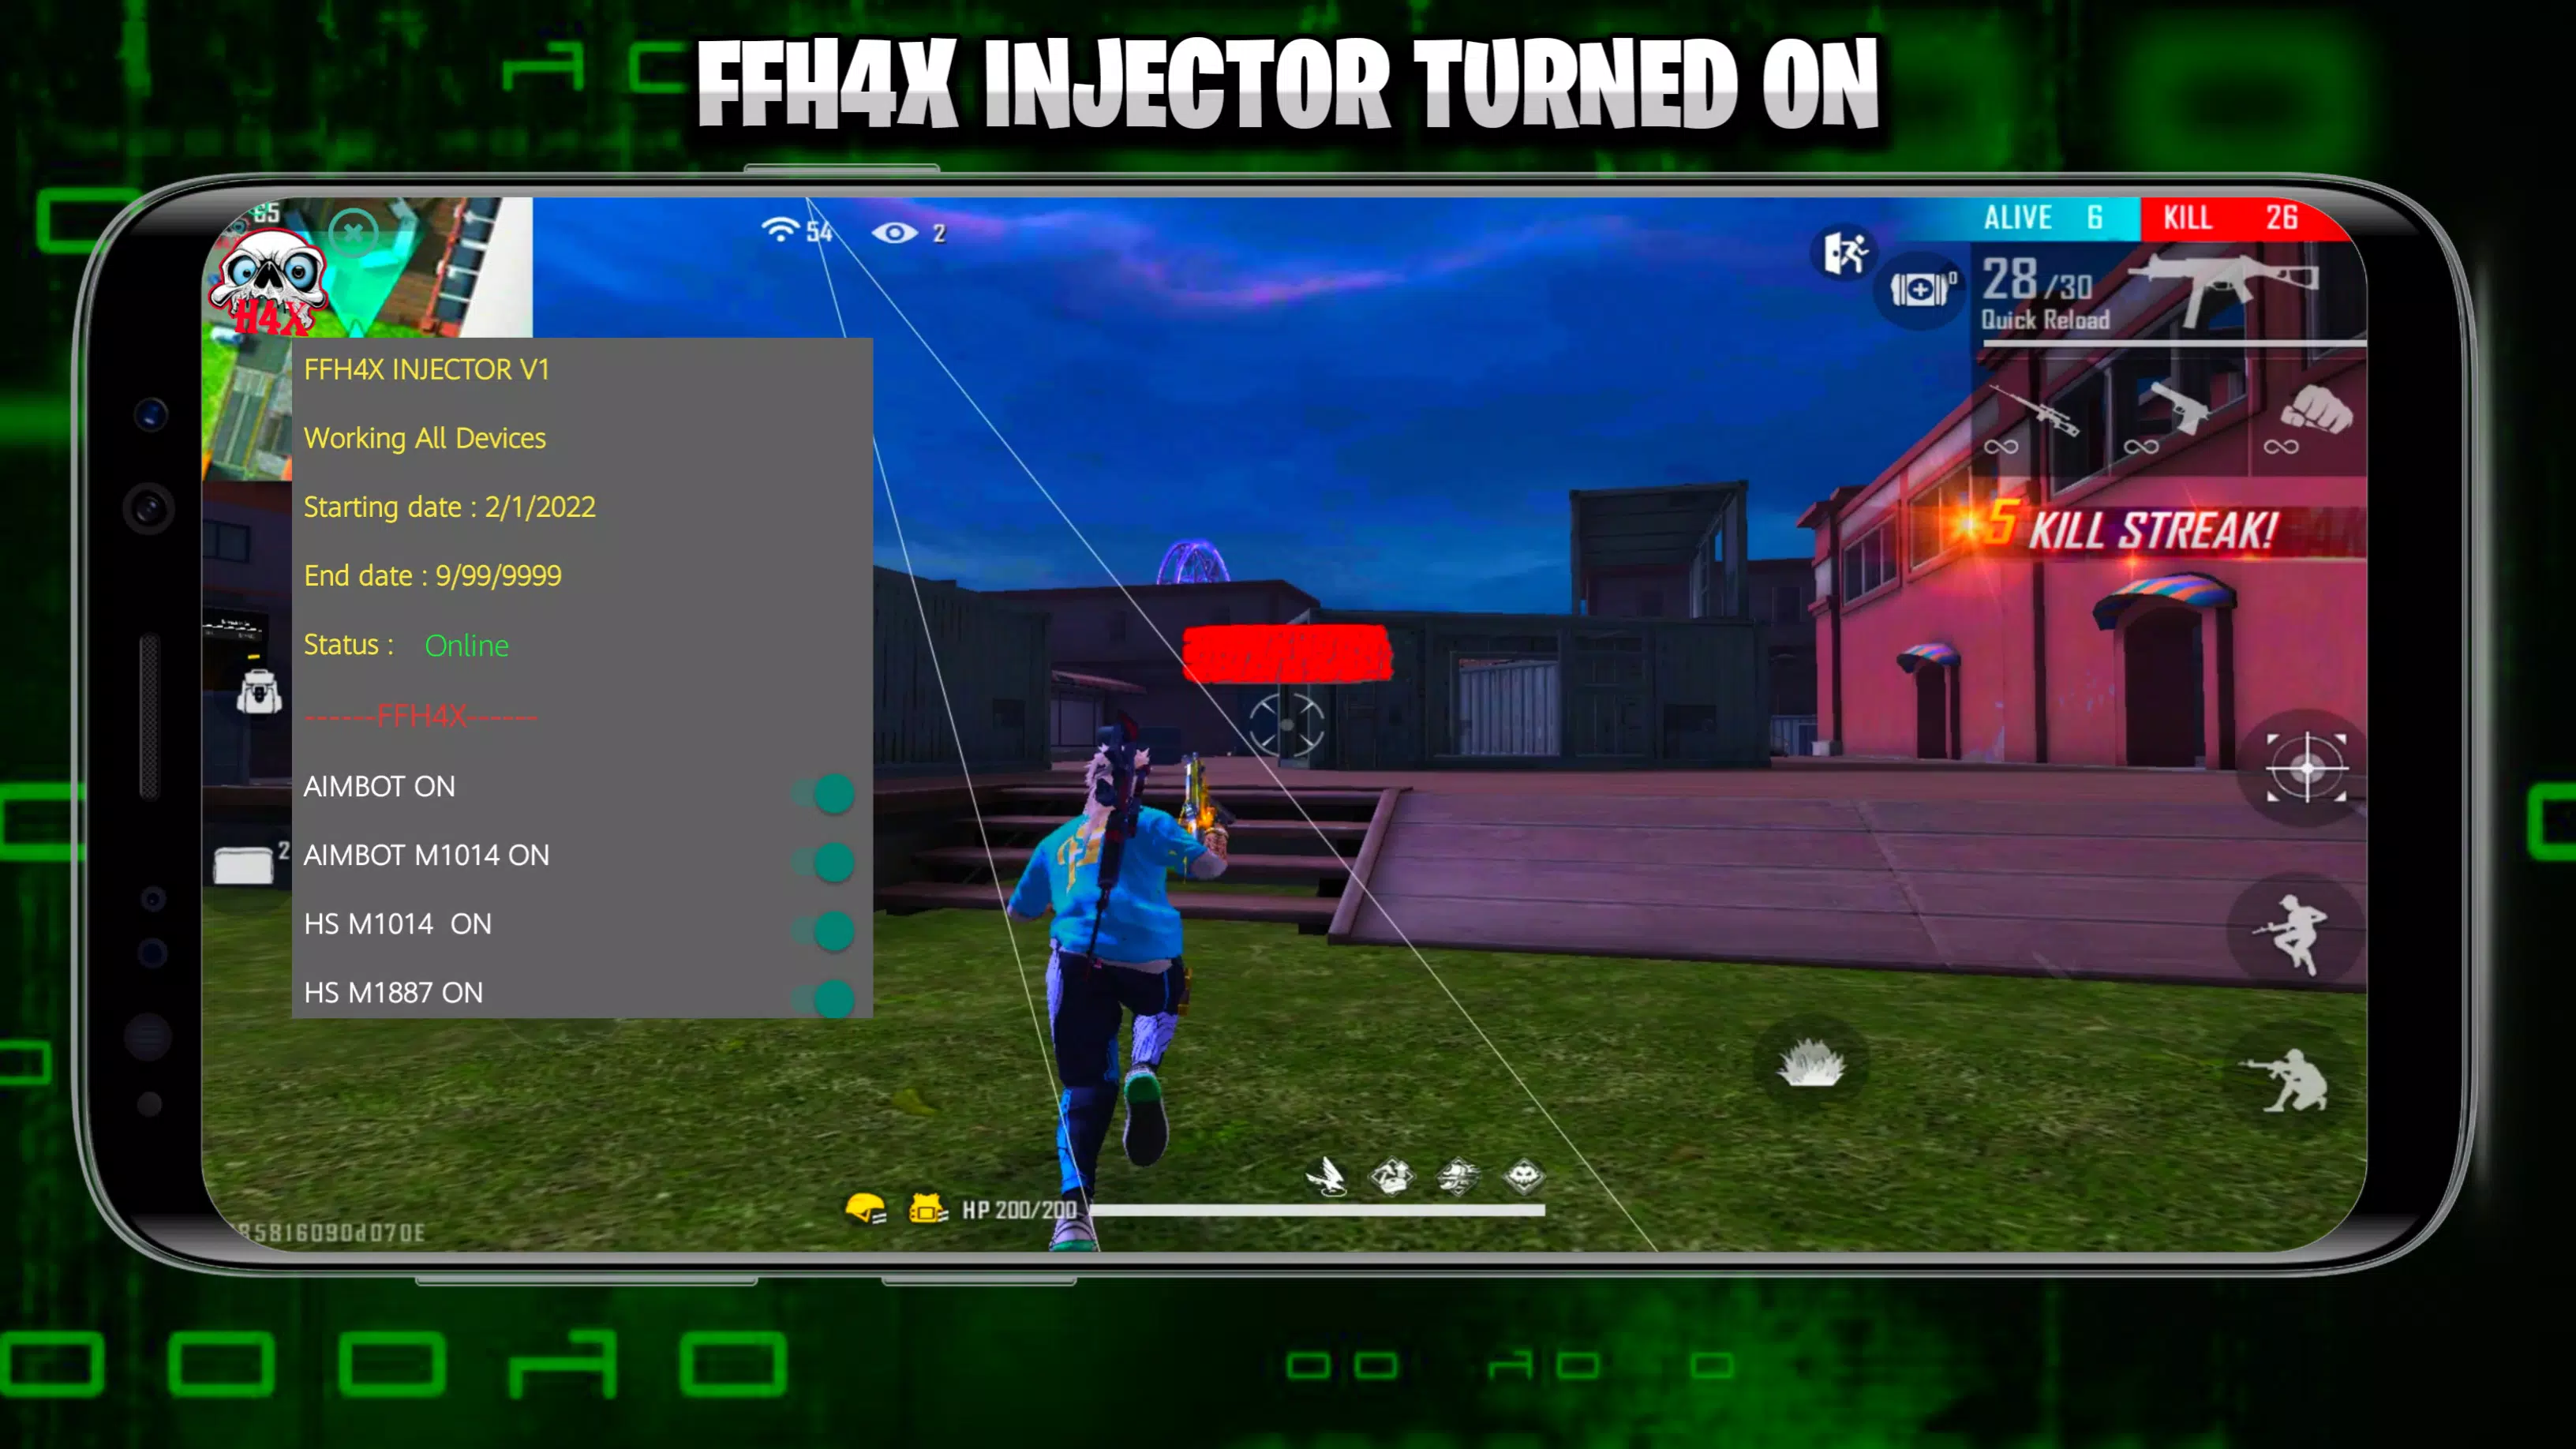 FFH4X Regedit V119 APK (Latest Version) Download Free For Android